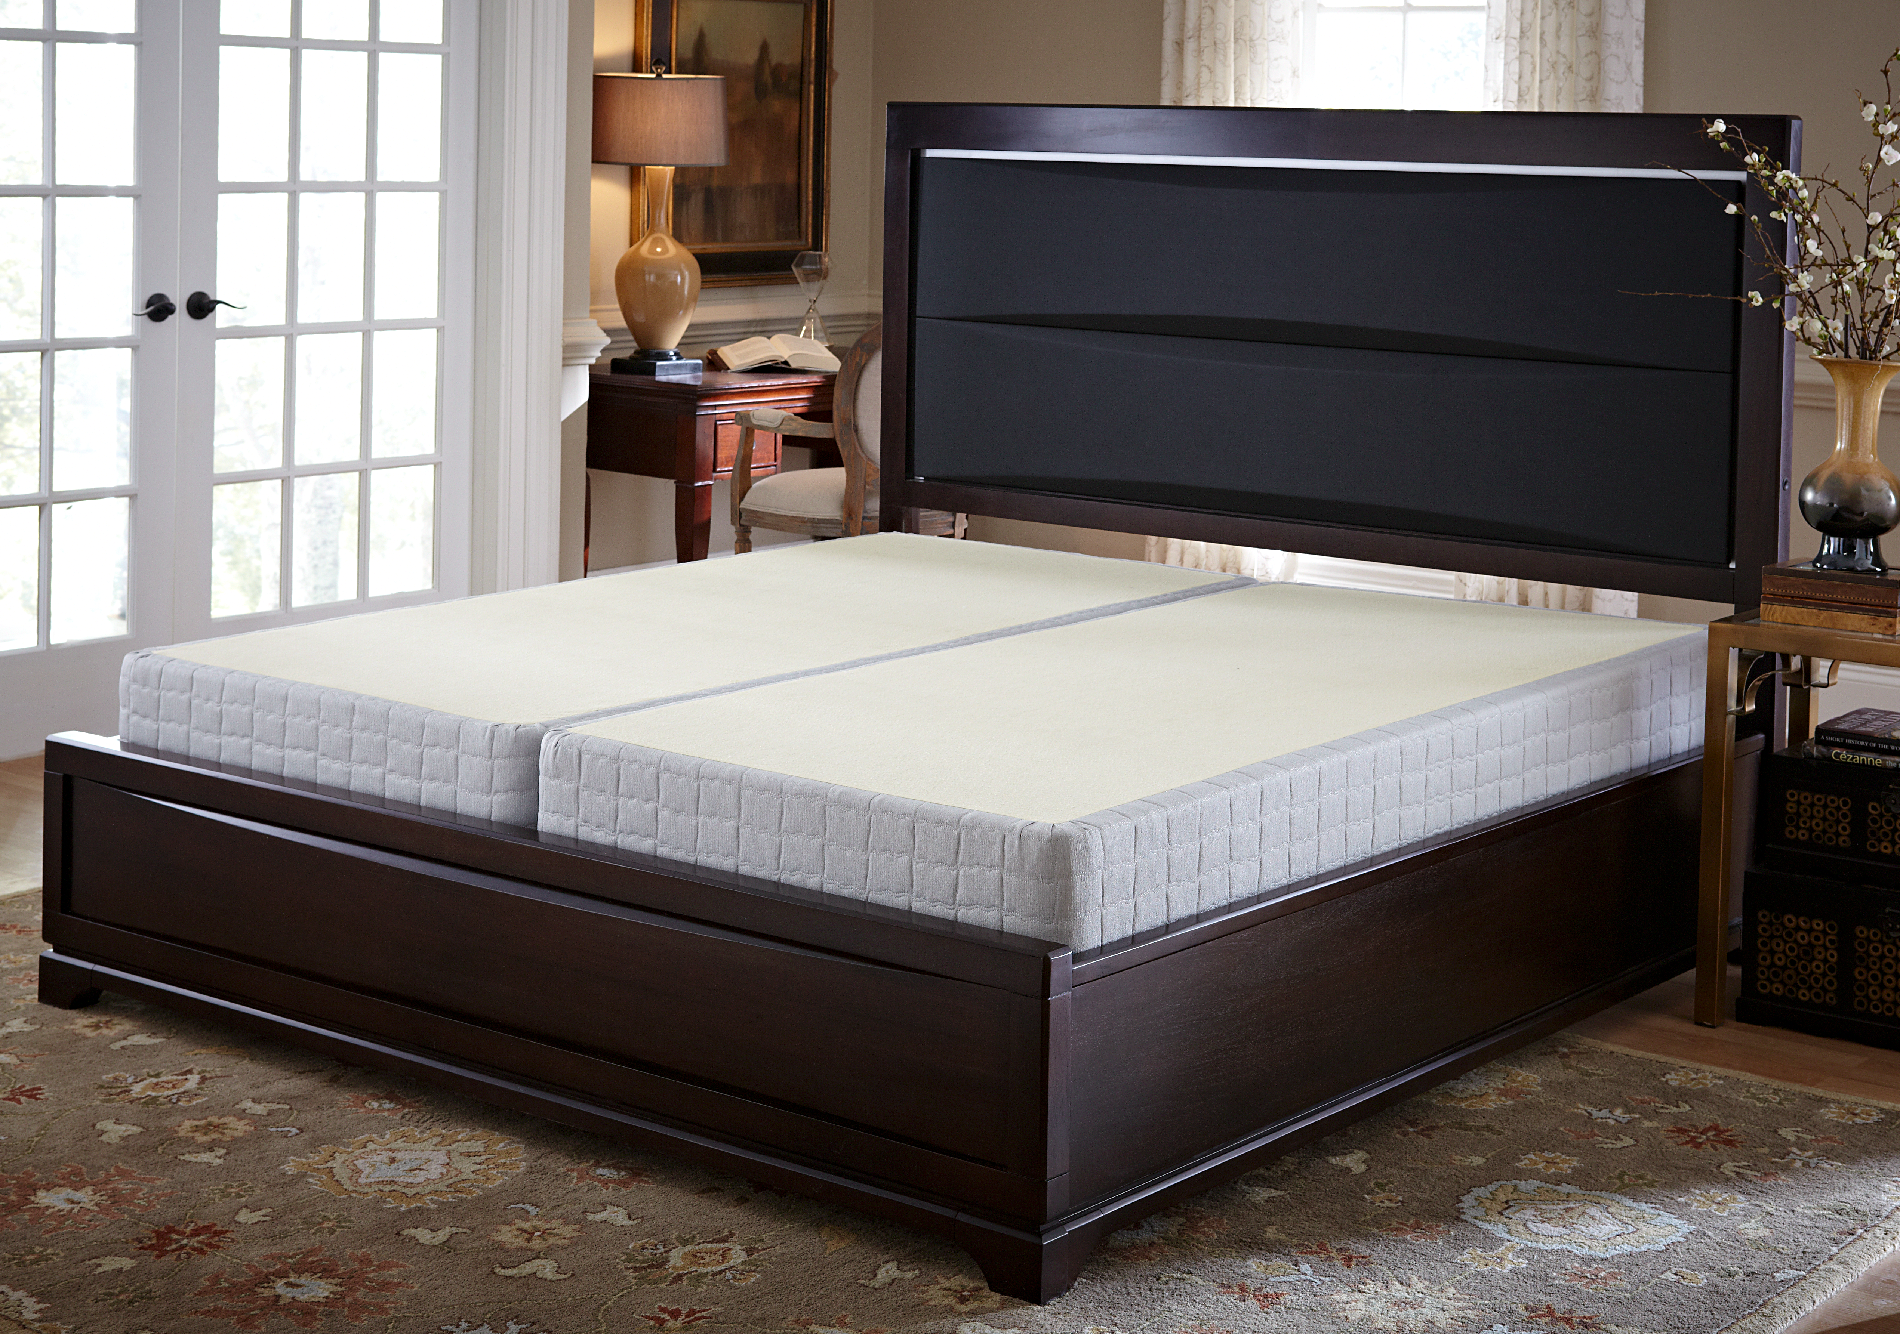 CLOSEOUT WHILE SUPPLIES LAST - Ivory Nights Plush Twin Mattress Only